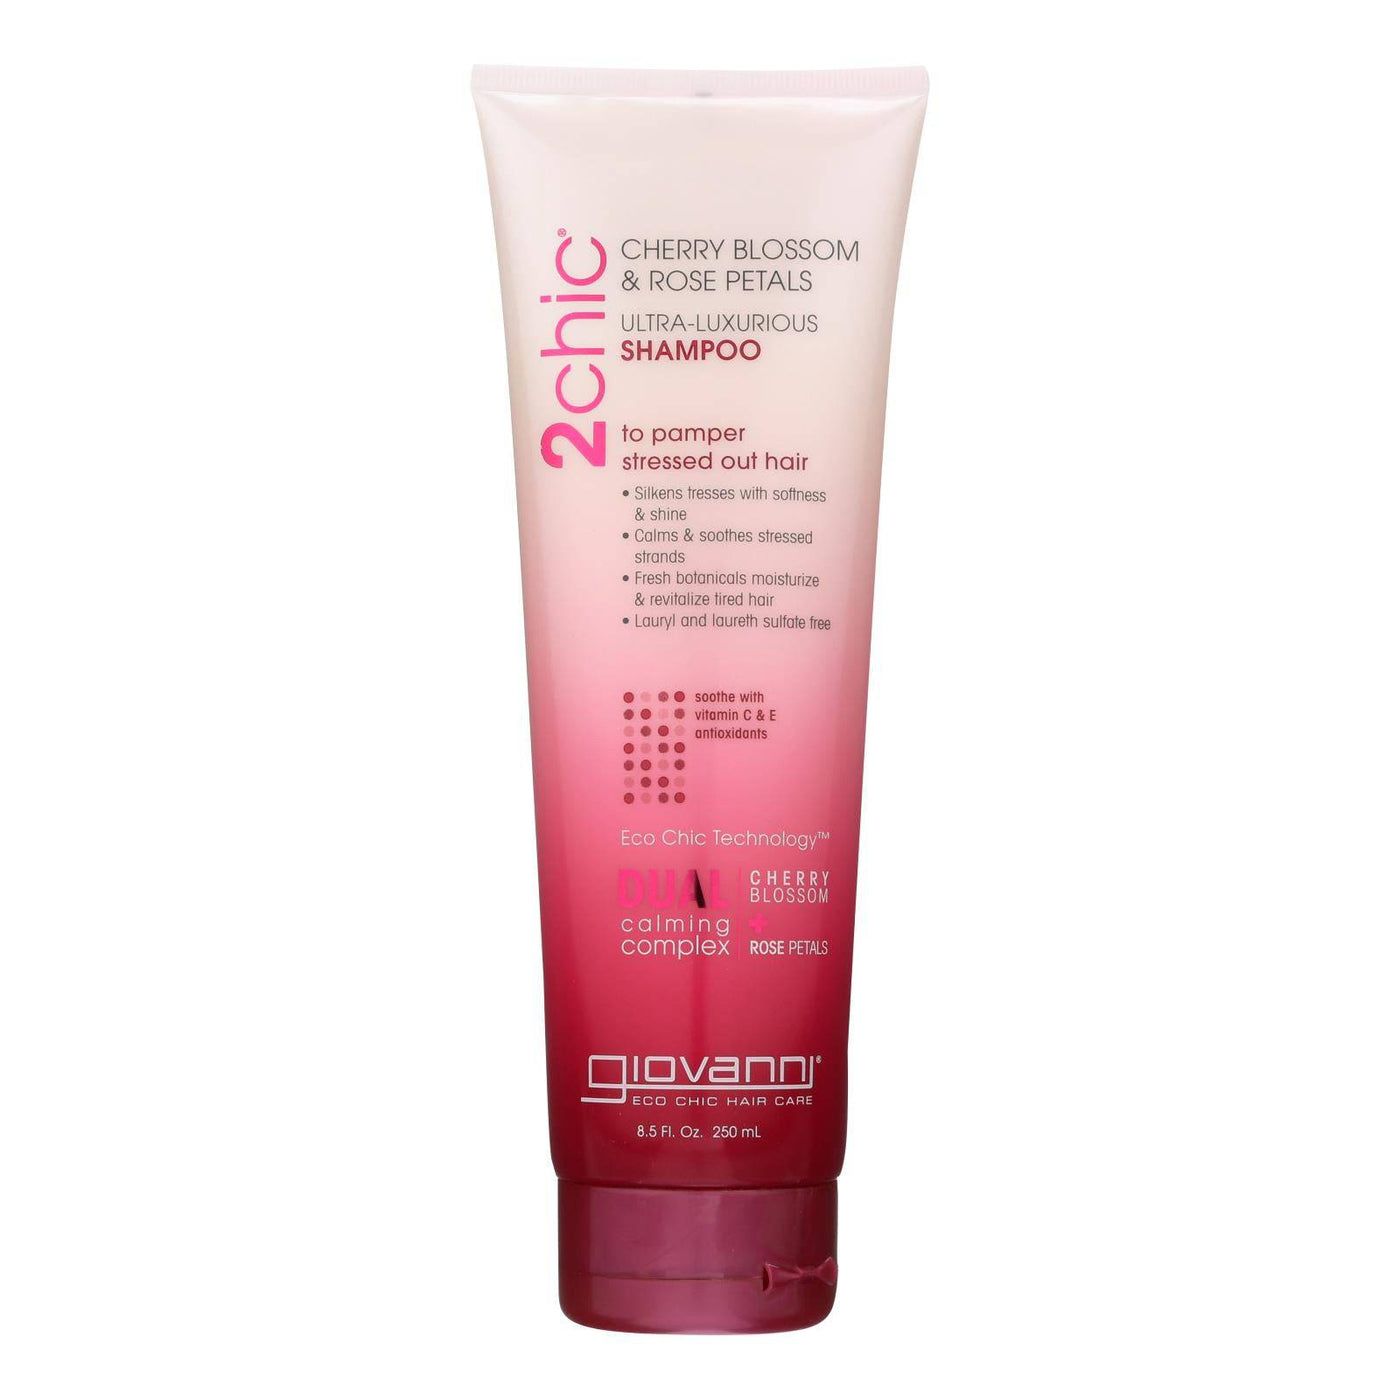 Giovanni Hair Care Products 2chic Shampoo - Cherry Blossom And Rose Petals - 8.5 Fl Oz | OnlyNaturals.us